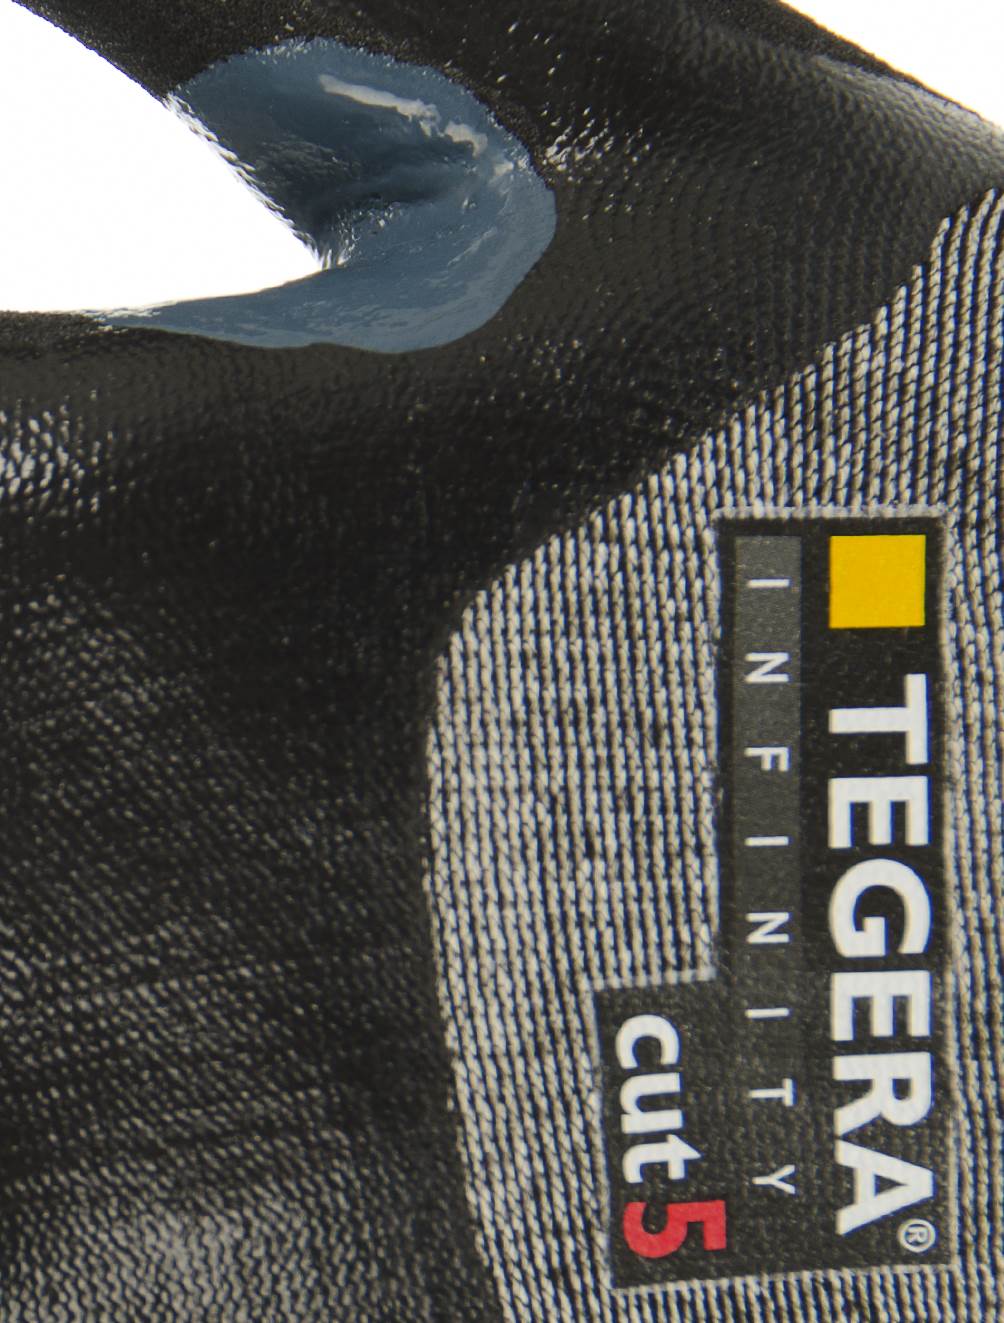 CRF Technology offers dexterity as well as Level 5 cut protection